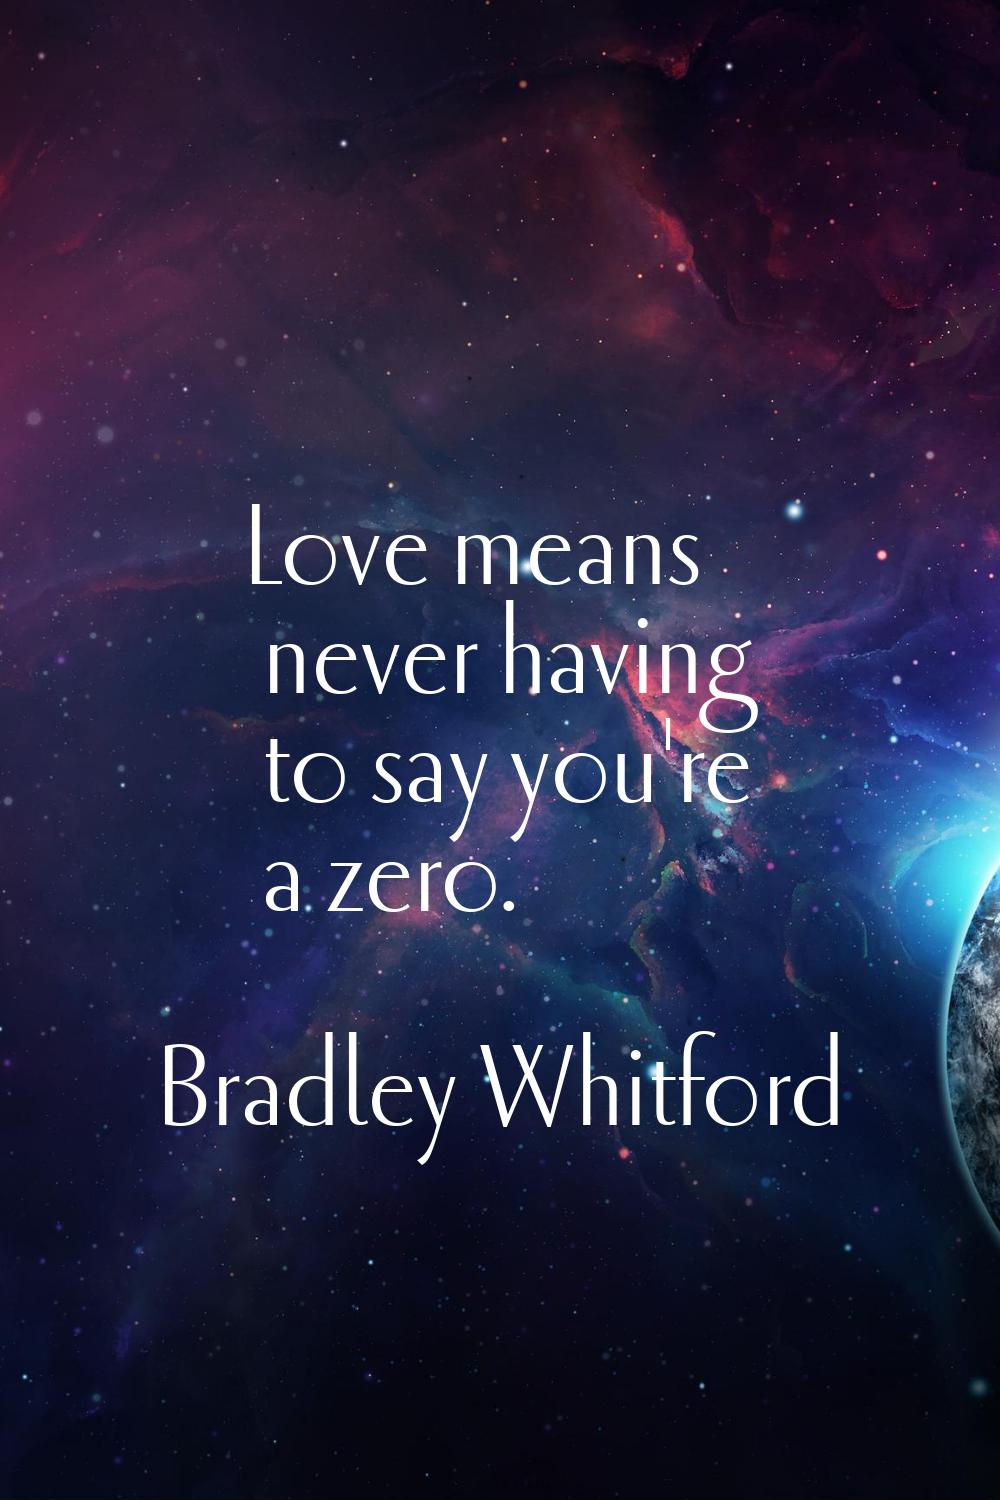 Love means never having to say you're a zero.